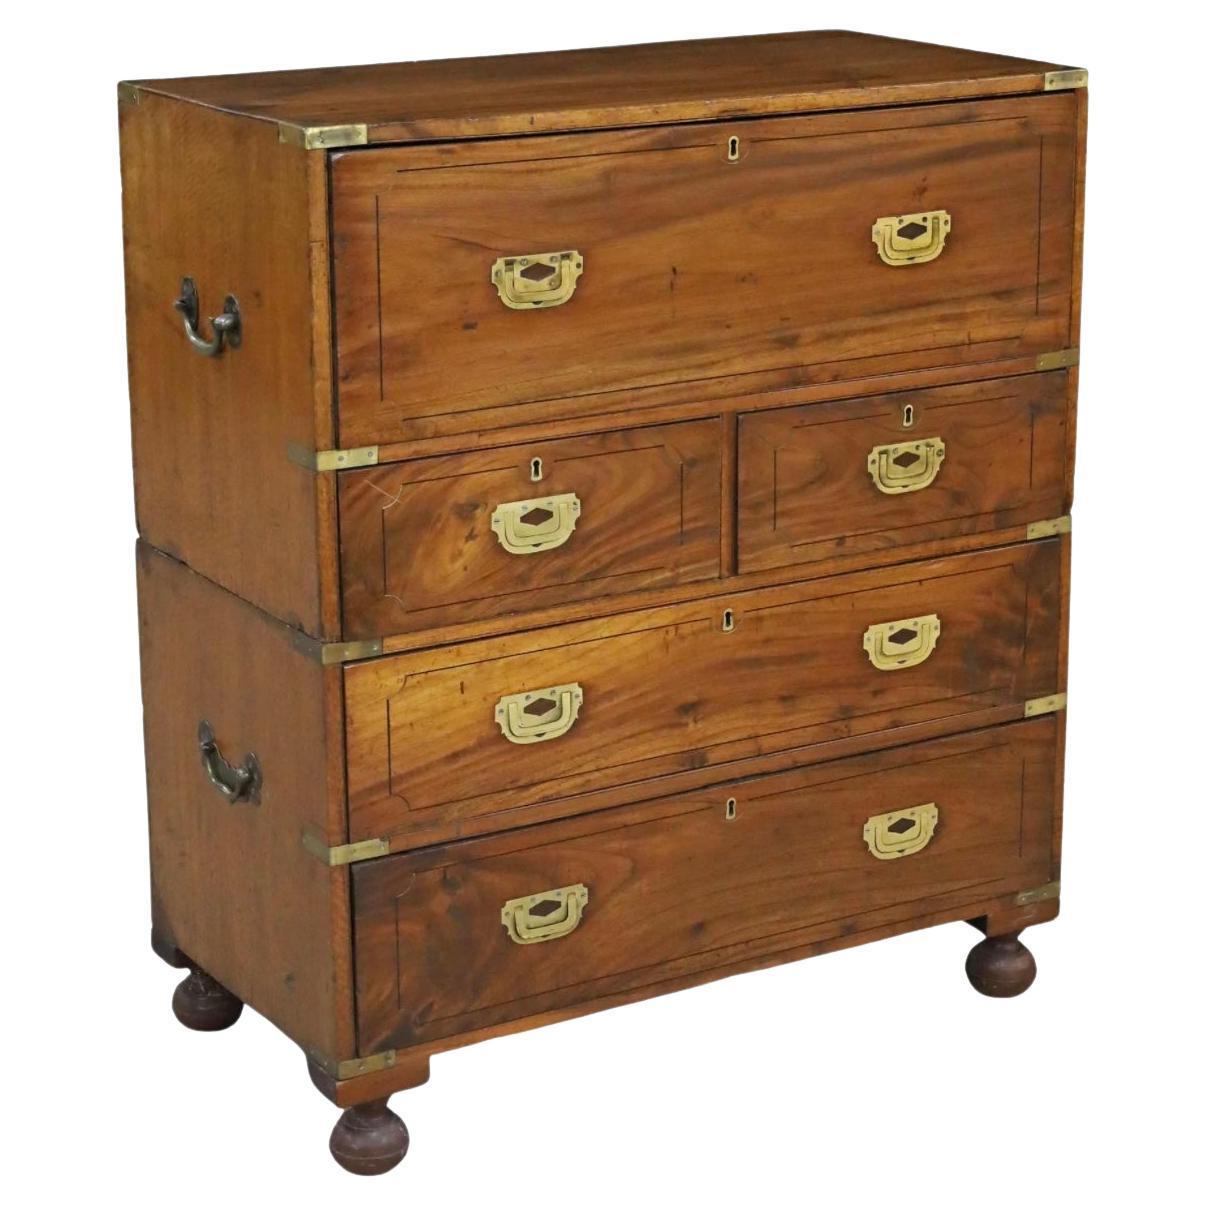 English 19th Century Camphor Wood Campaign Chest